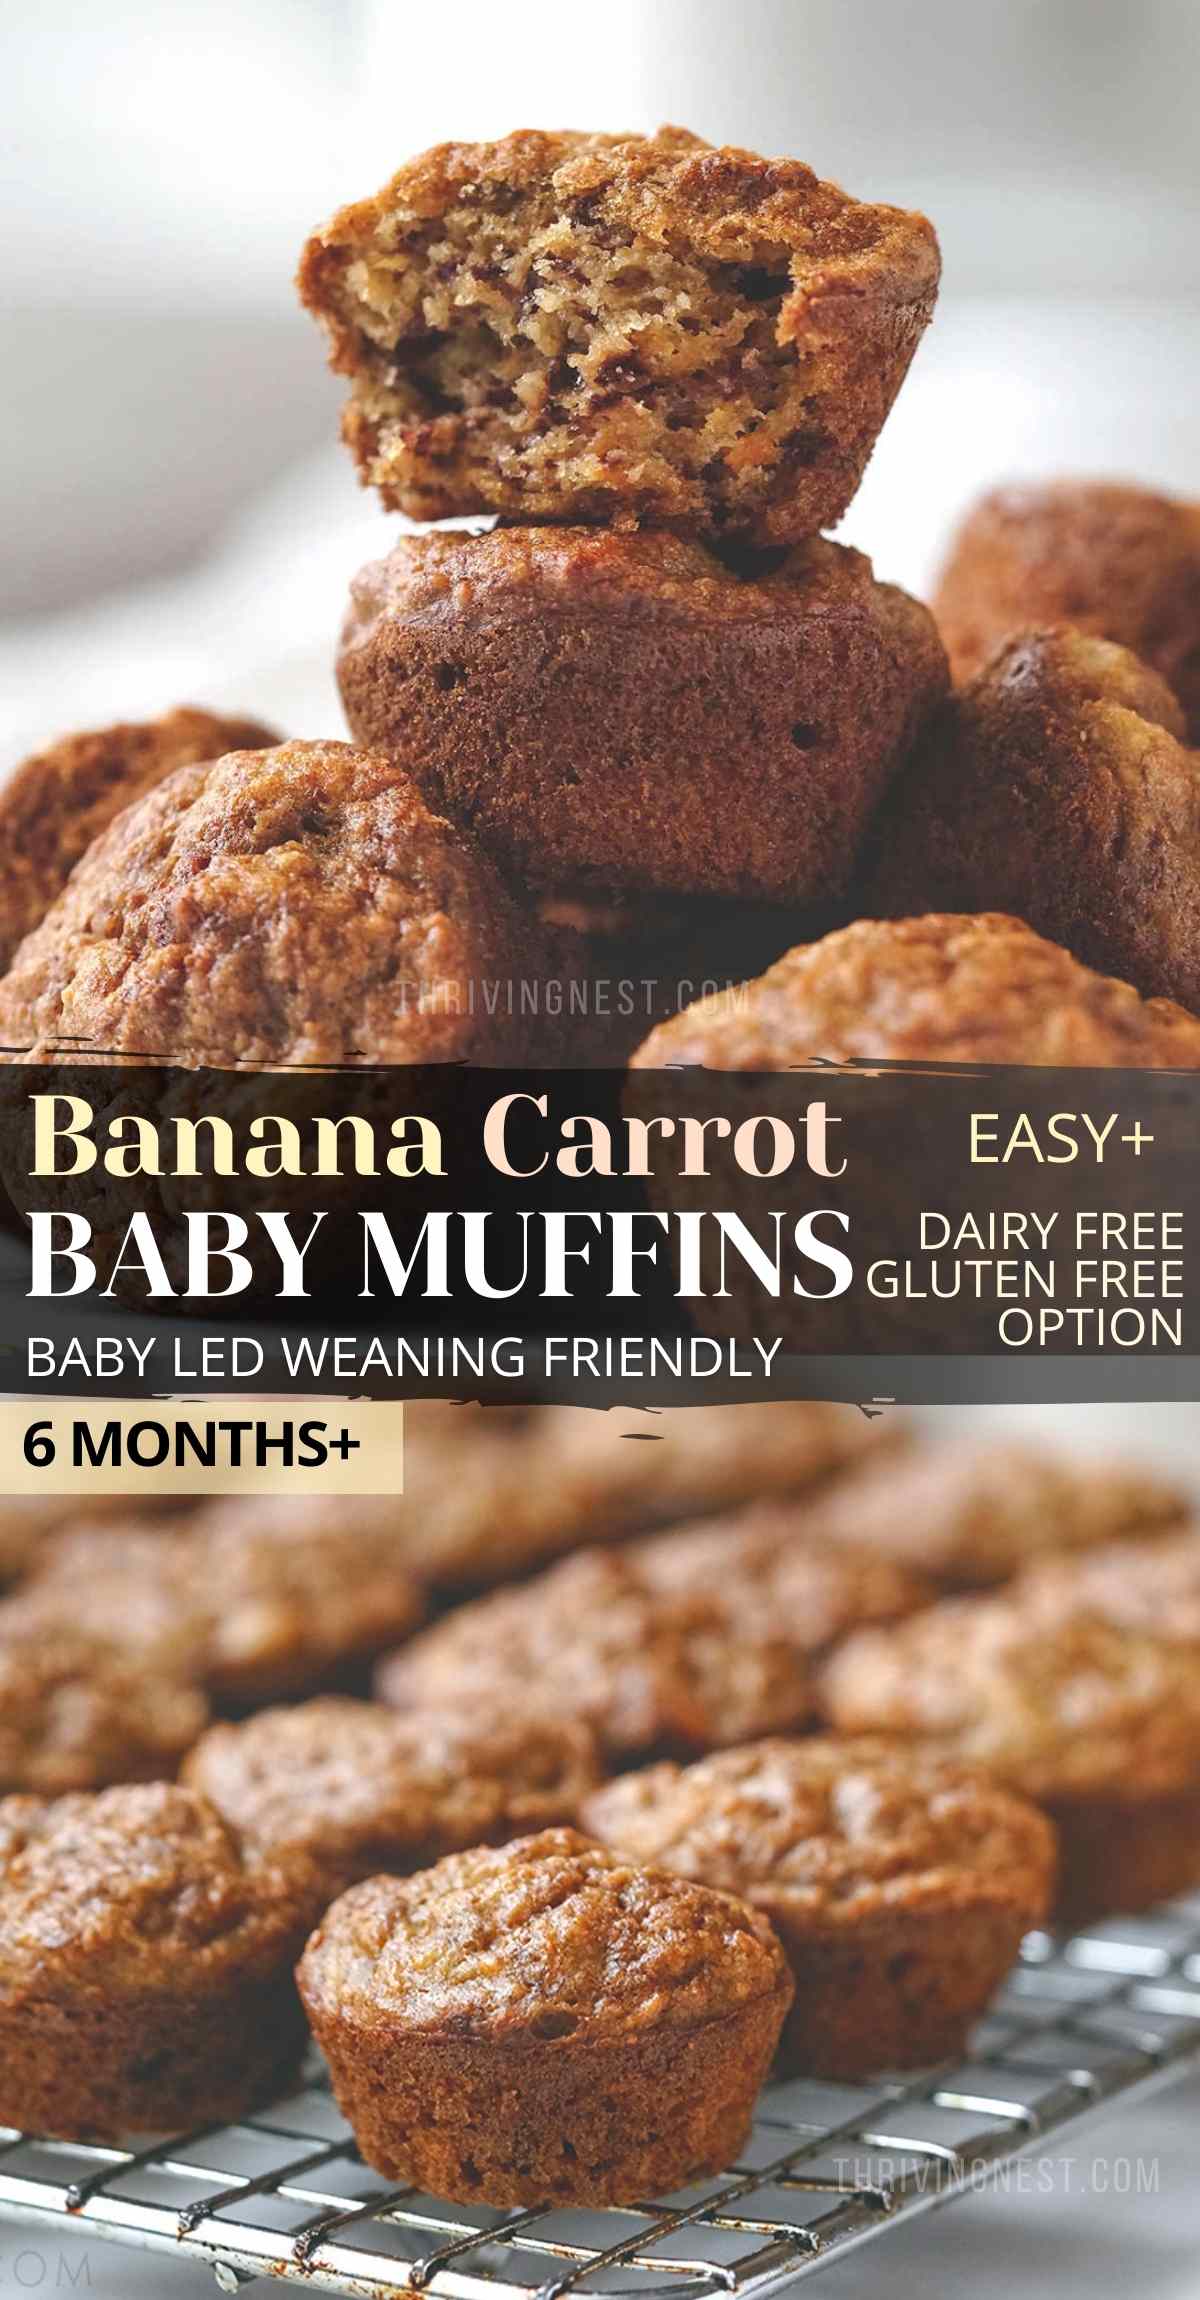 Healthy banana carrot muffins for baby toddler / kids  - naturally sweetened with carrots and banana, enriched with oatmeal and with a soft, moist texture. These healthy baby muffins are freezer friendly and a great breakfast or snack for babies (6 months+), toddlers and older kids. Get these baby friendly carrot banana muffins done in just under 40 minutes. #babymuffins #bananacarrotmuffins #carrotbananamuffins #babyledweaningmuffins #babyledweaning #carrotmuffins #minimuffins #healthymuffins 